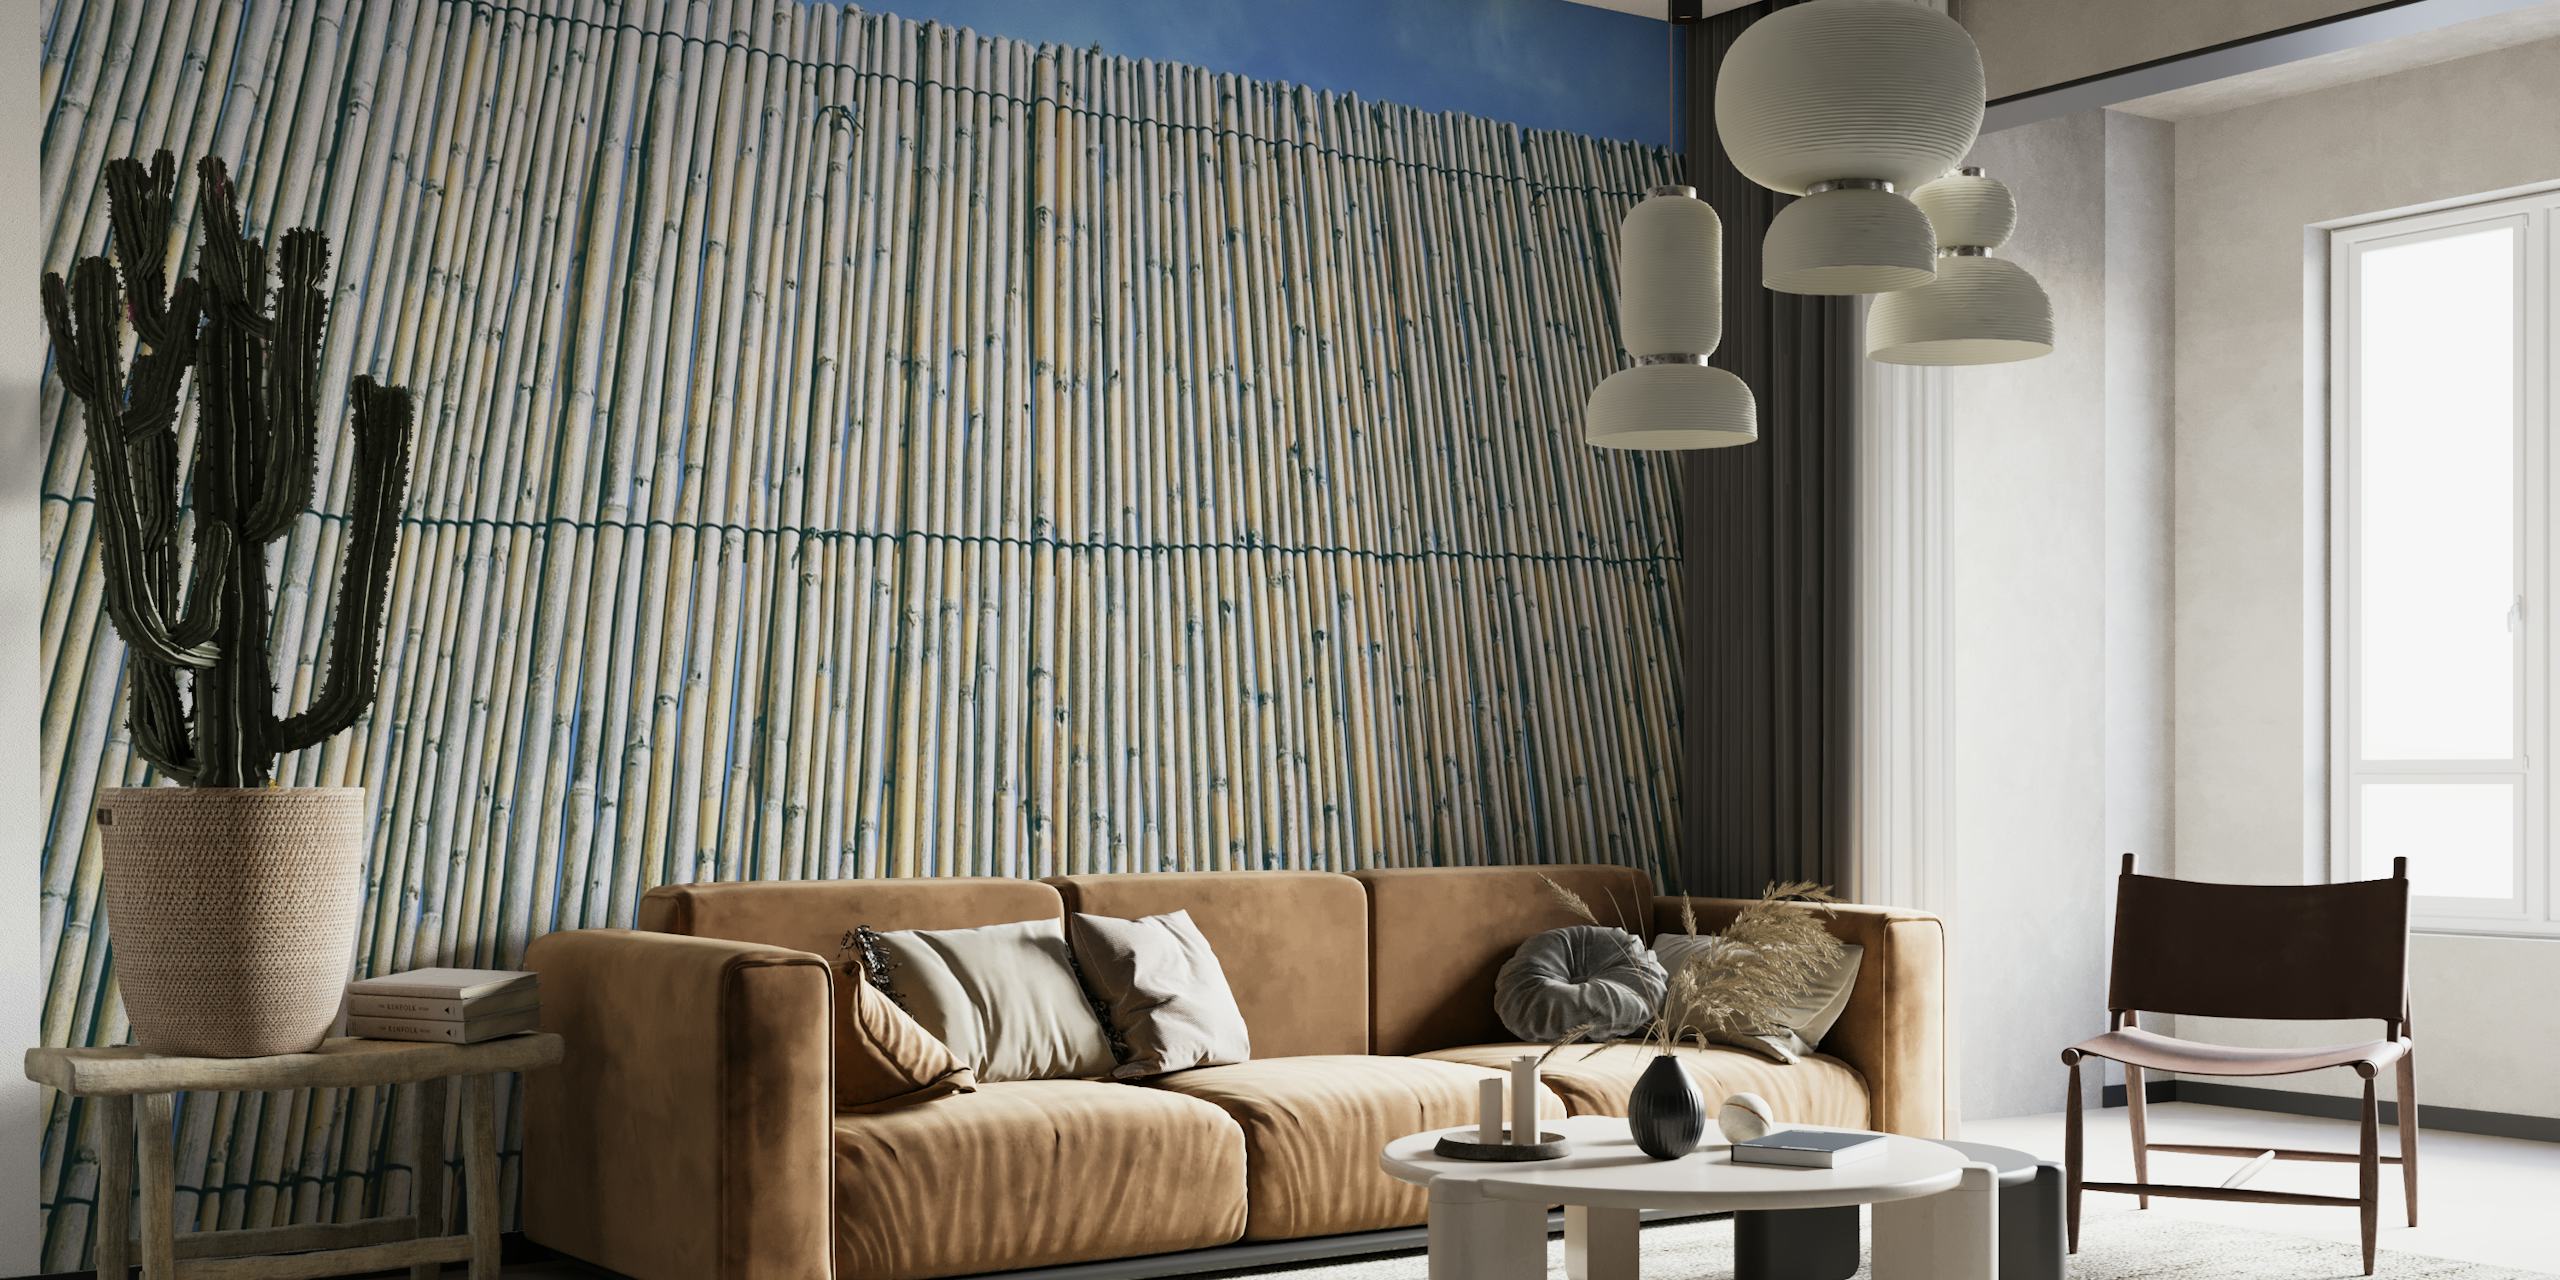 Worn Bamboo Wall mural showing textured bamboo patterns for home decor